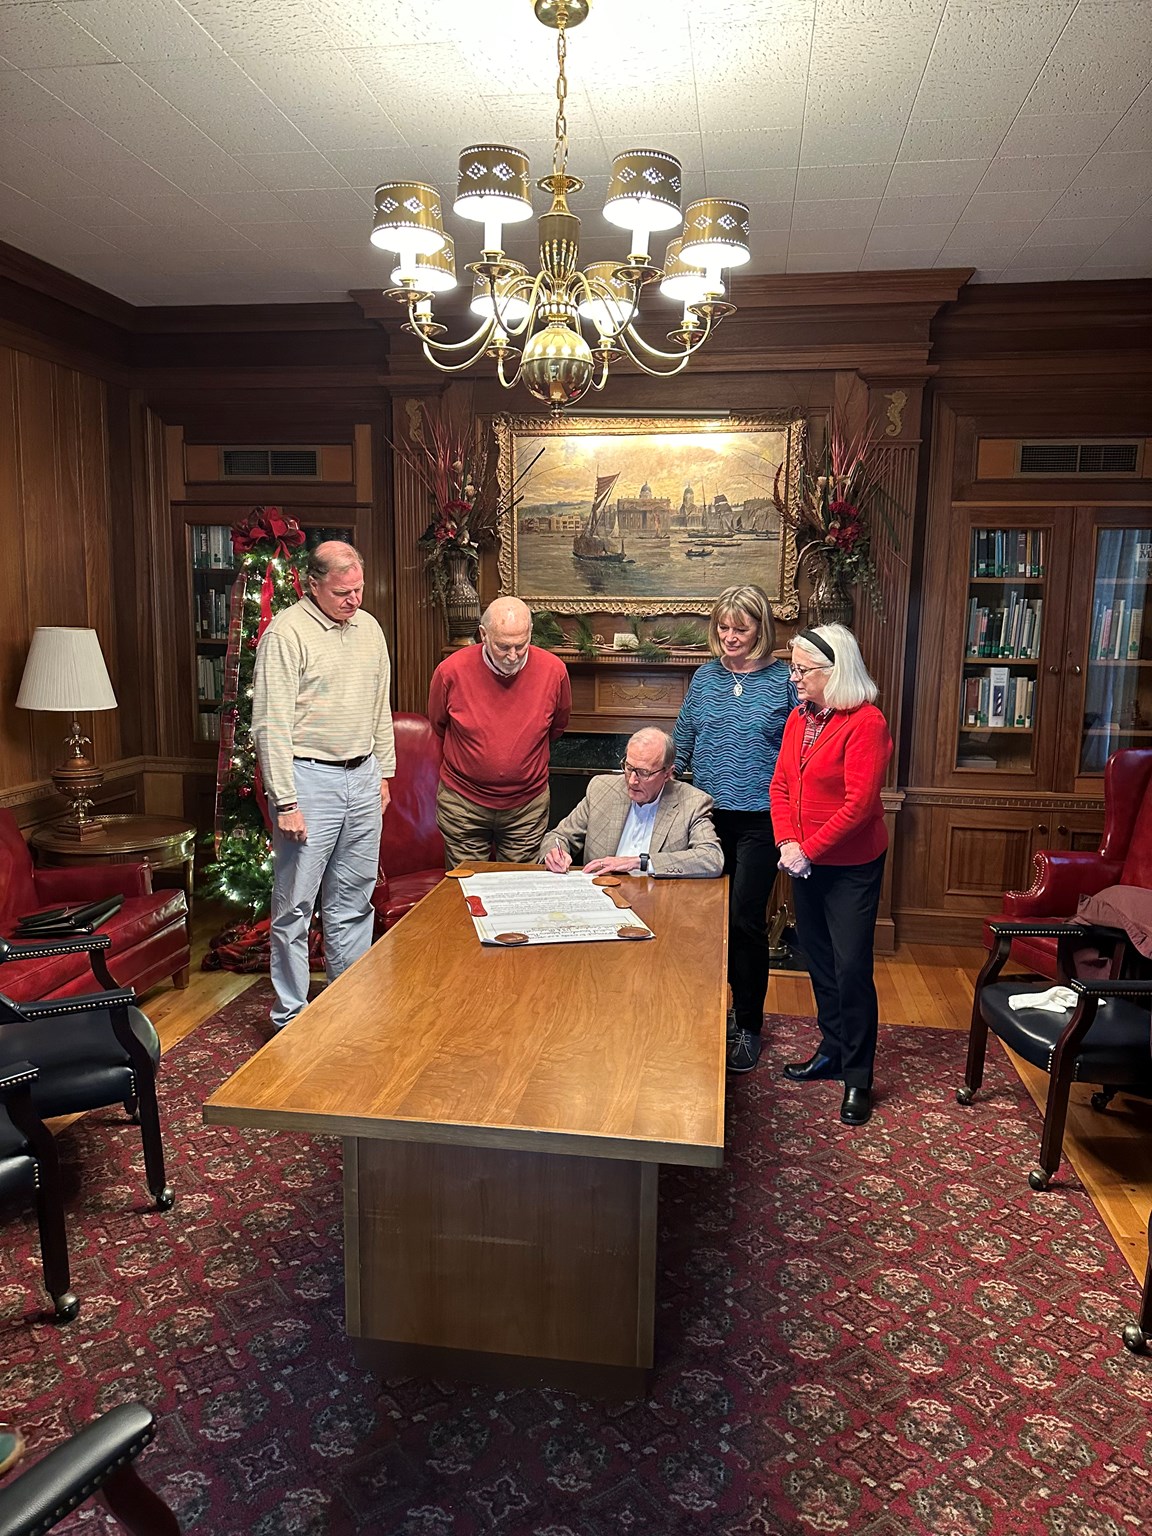 Signing of the Mutual Benevolence Agreement between Pinehurst Village and the town of Dornoch